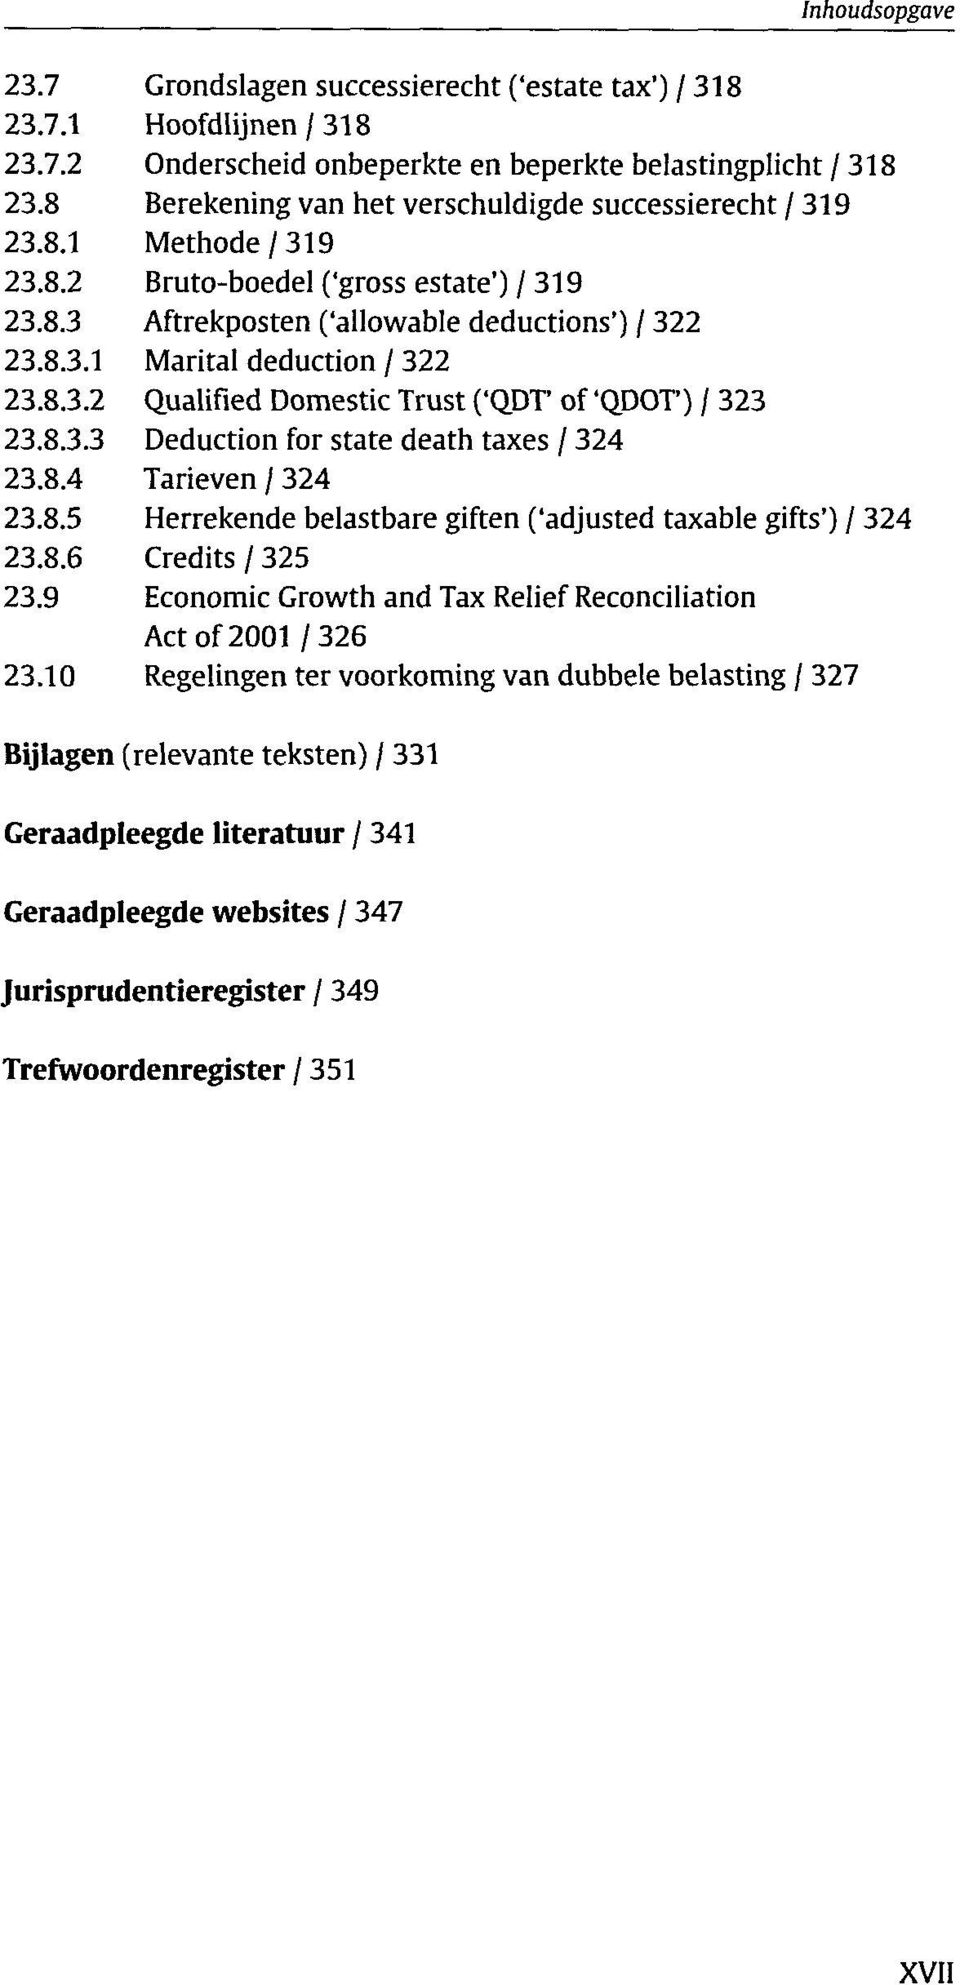 8.3.2 Qualified Domestic Trust ('QDT' of 'QDOT') / 323 23.8.3.3 Deduction for State death taxes / 324 23.8.4 Tarieven / 324 23.8.5 Herrekende belastbare giften ('adjusted taxable gifts') / 324 23.8.6 Credits / 325 23.